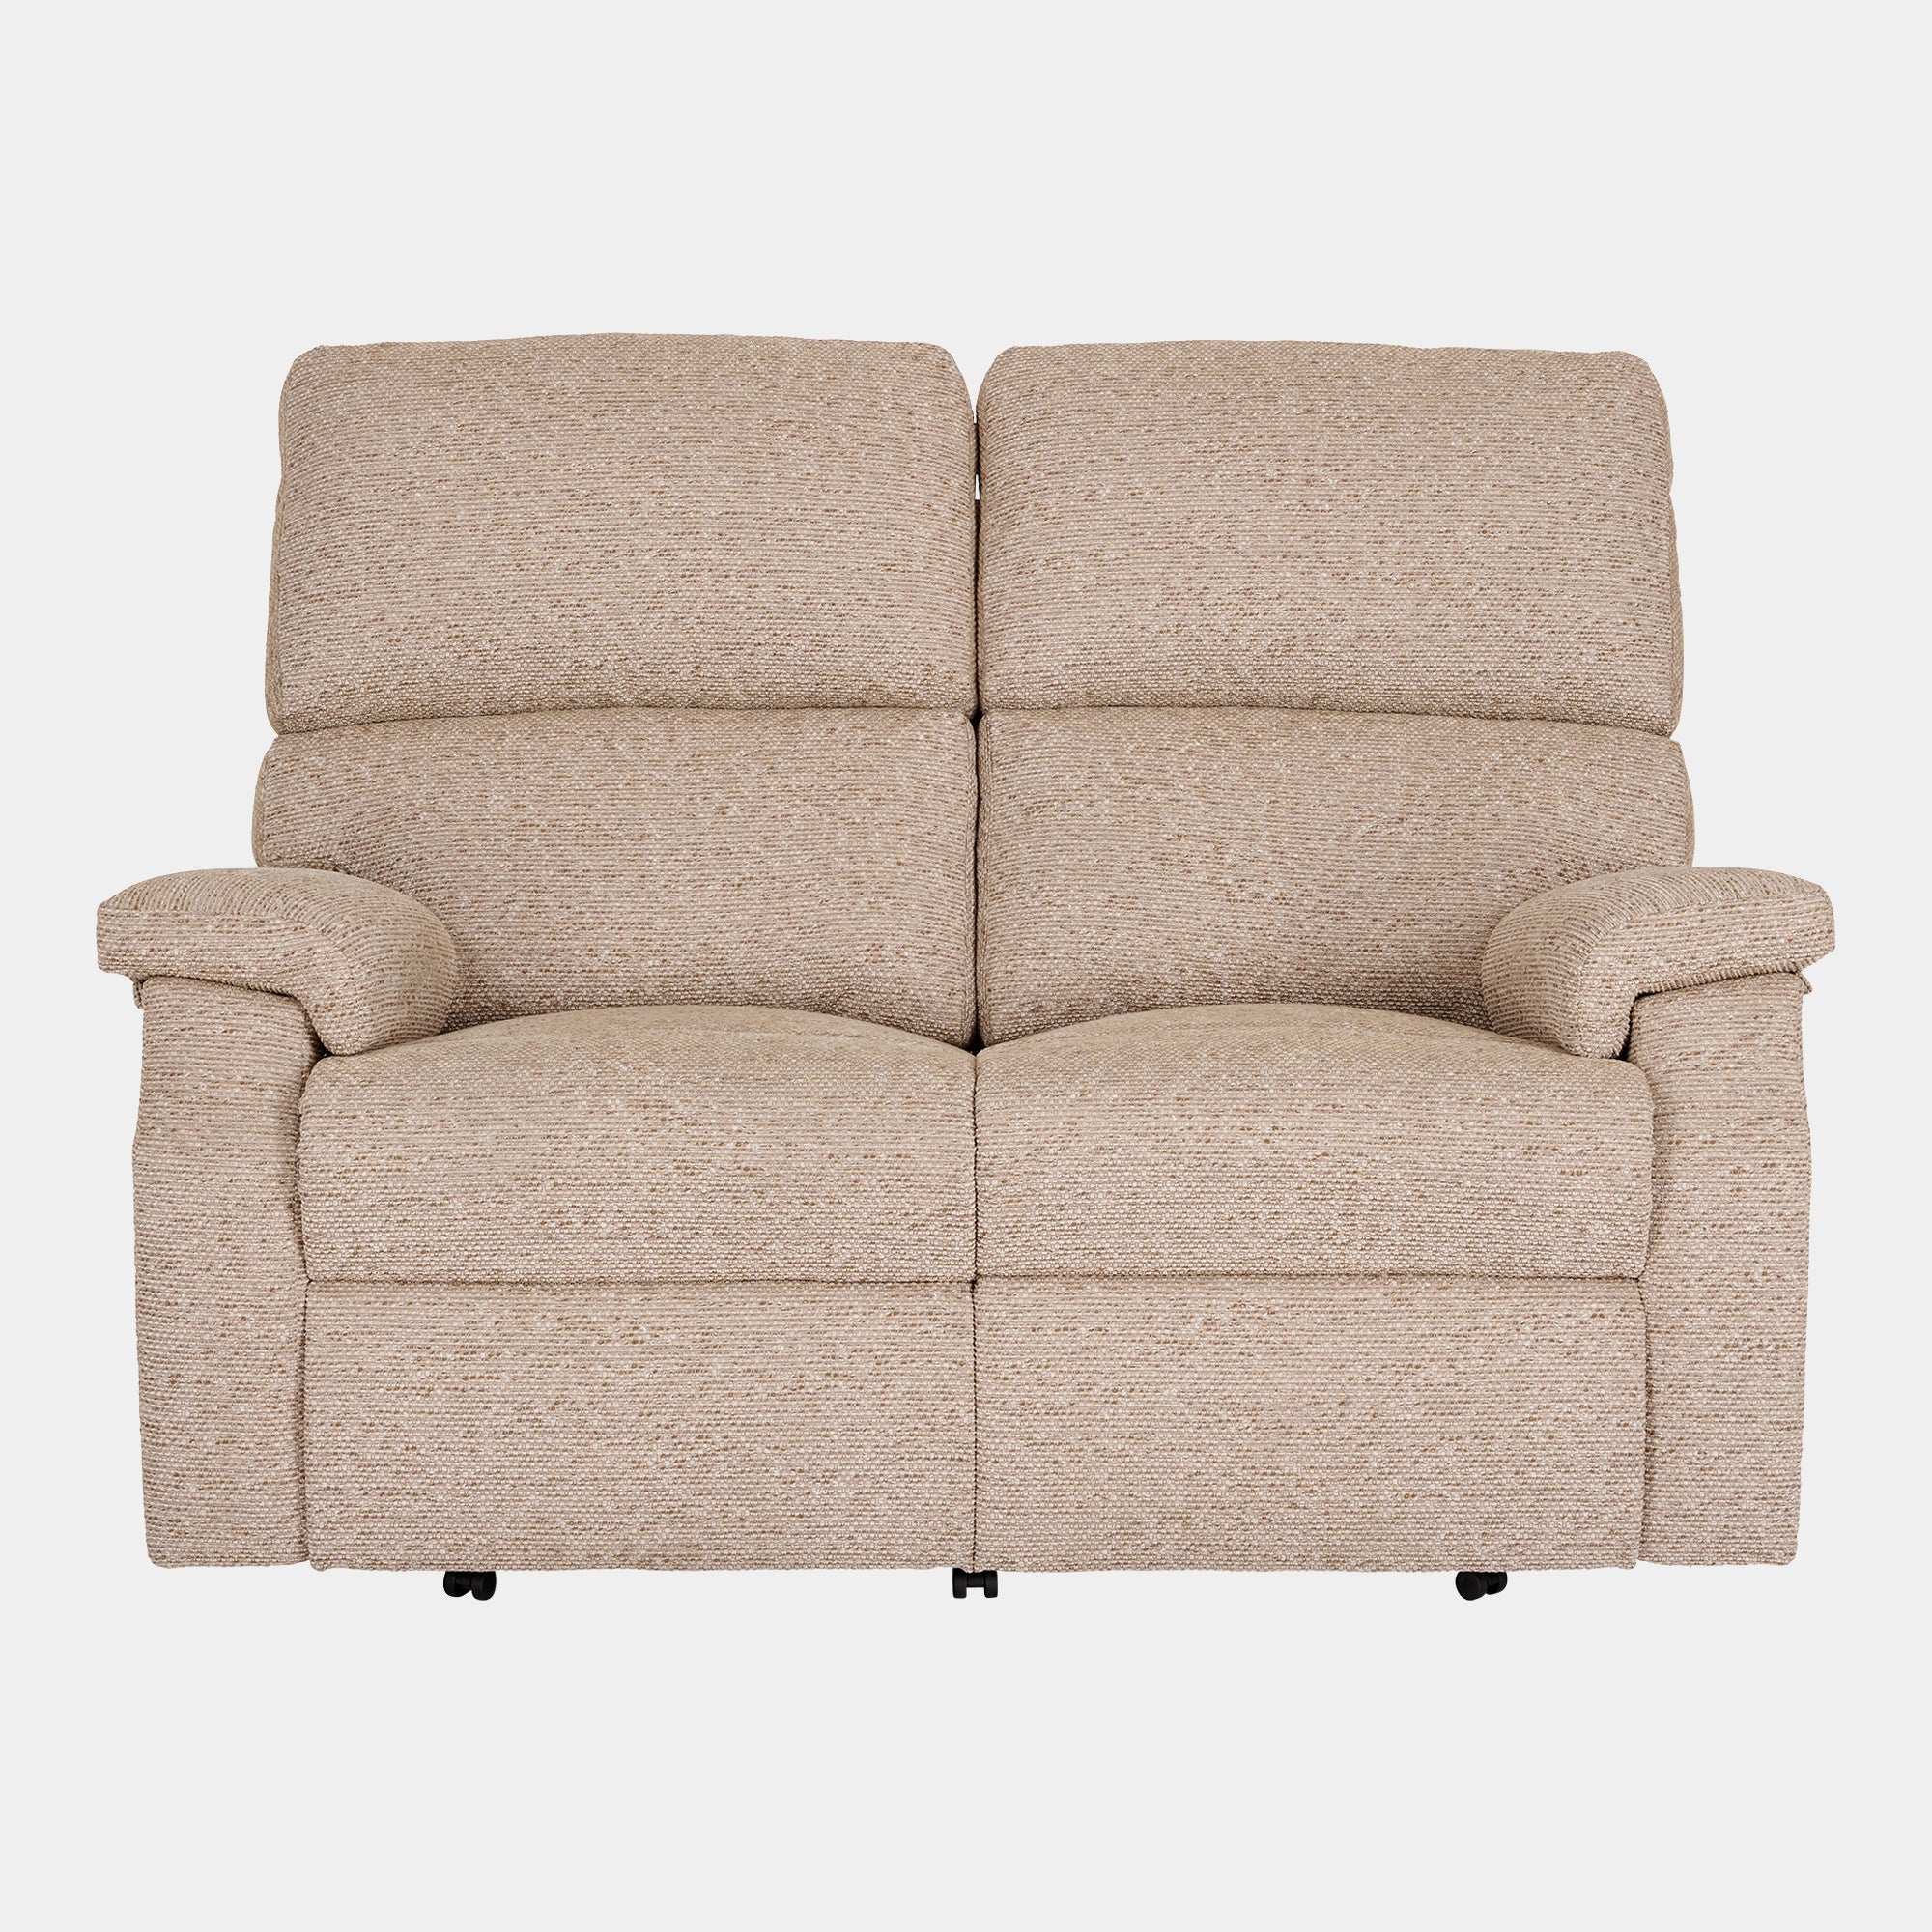 Bourton - 2 Seat Sofa In Fabric Or Leather Manual Recliner Fabric